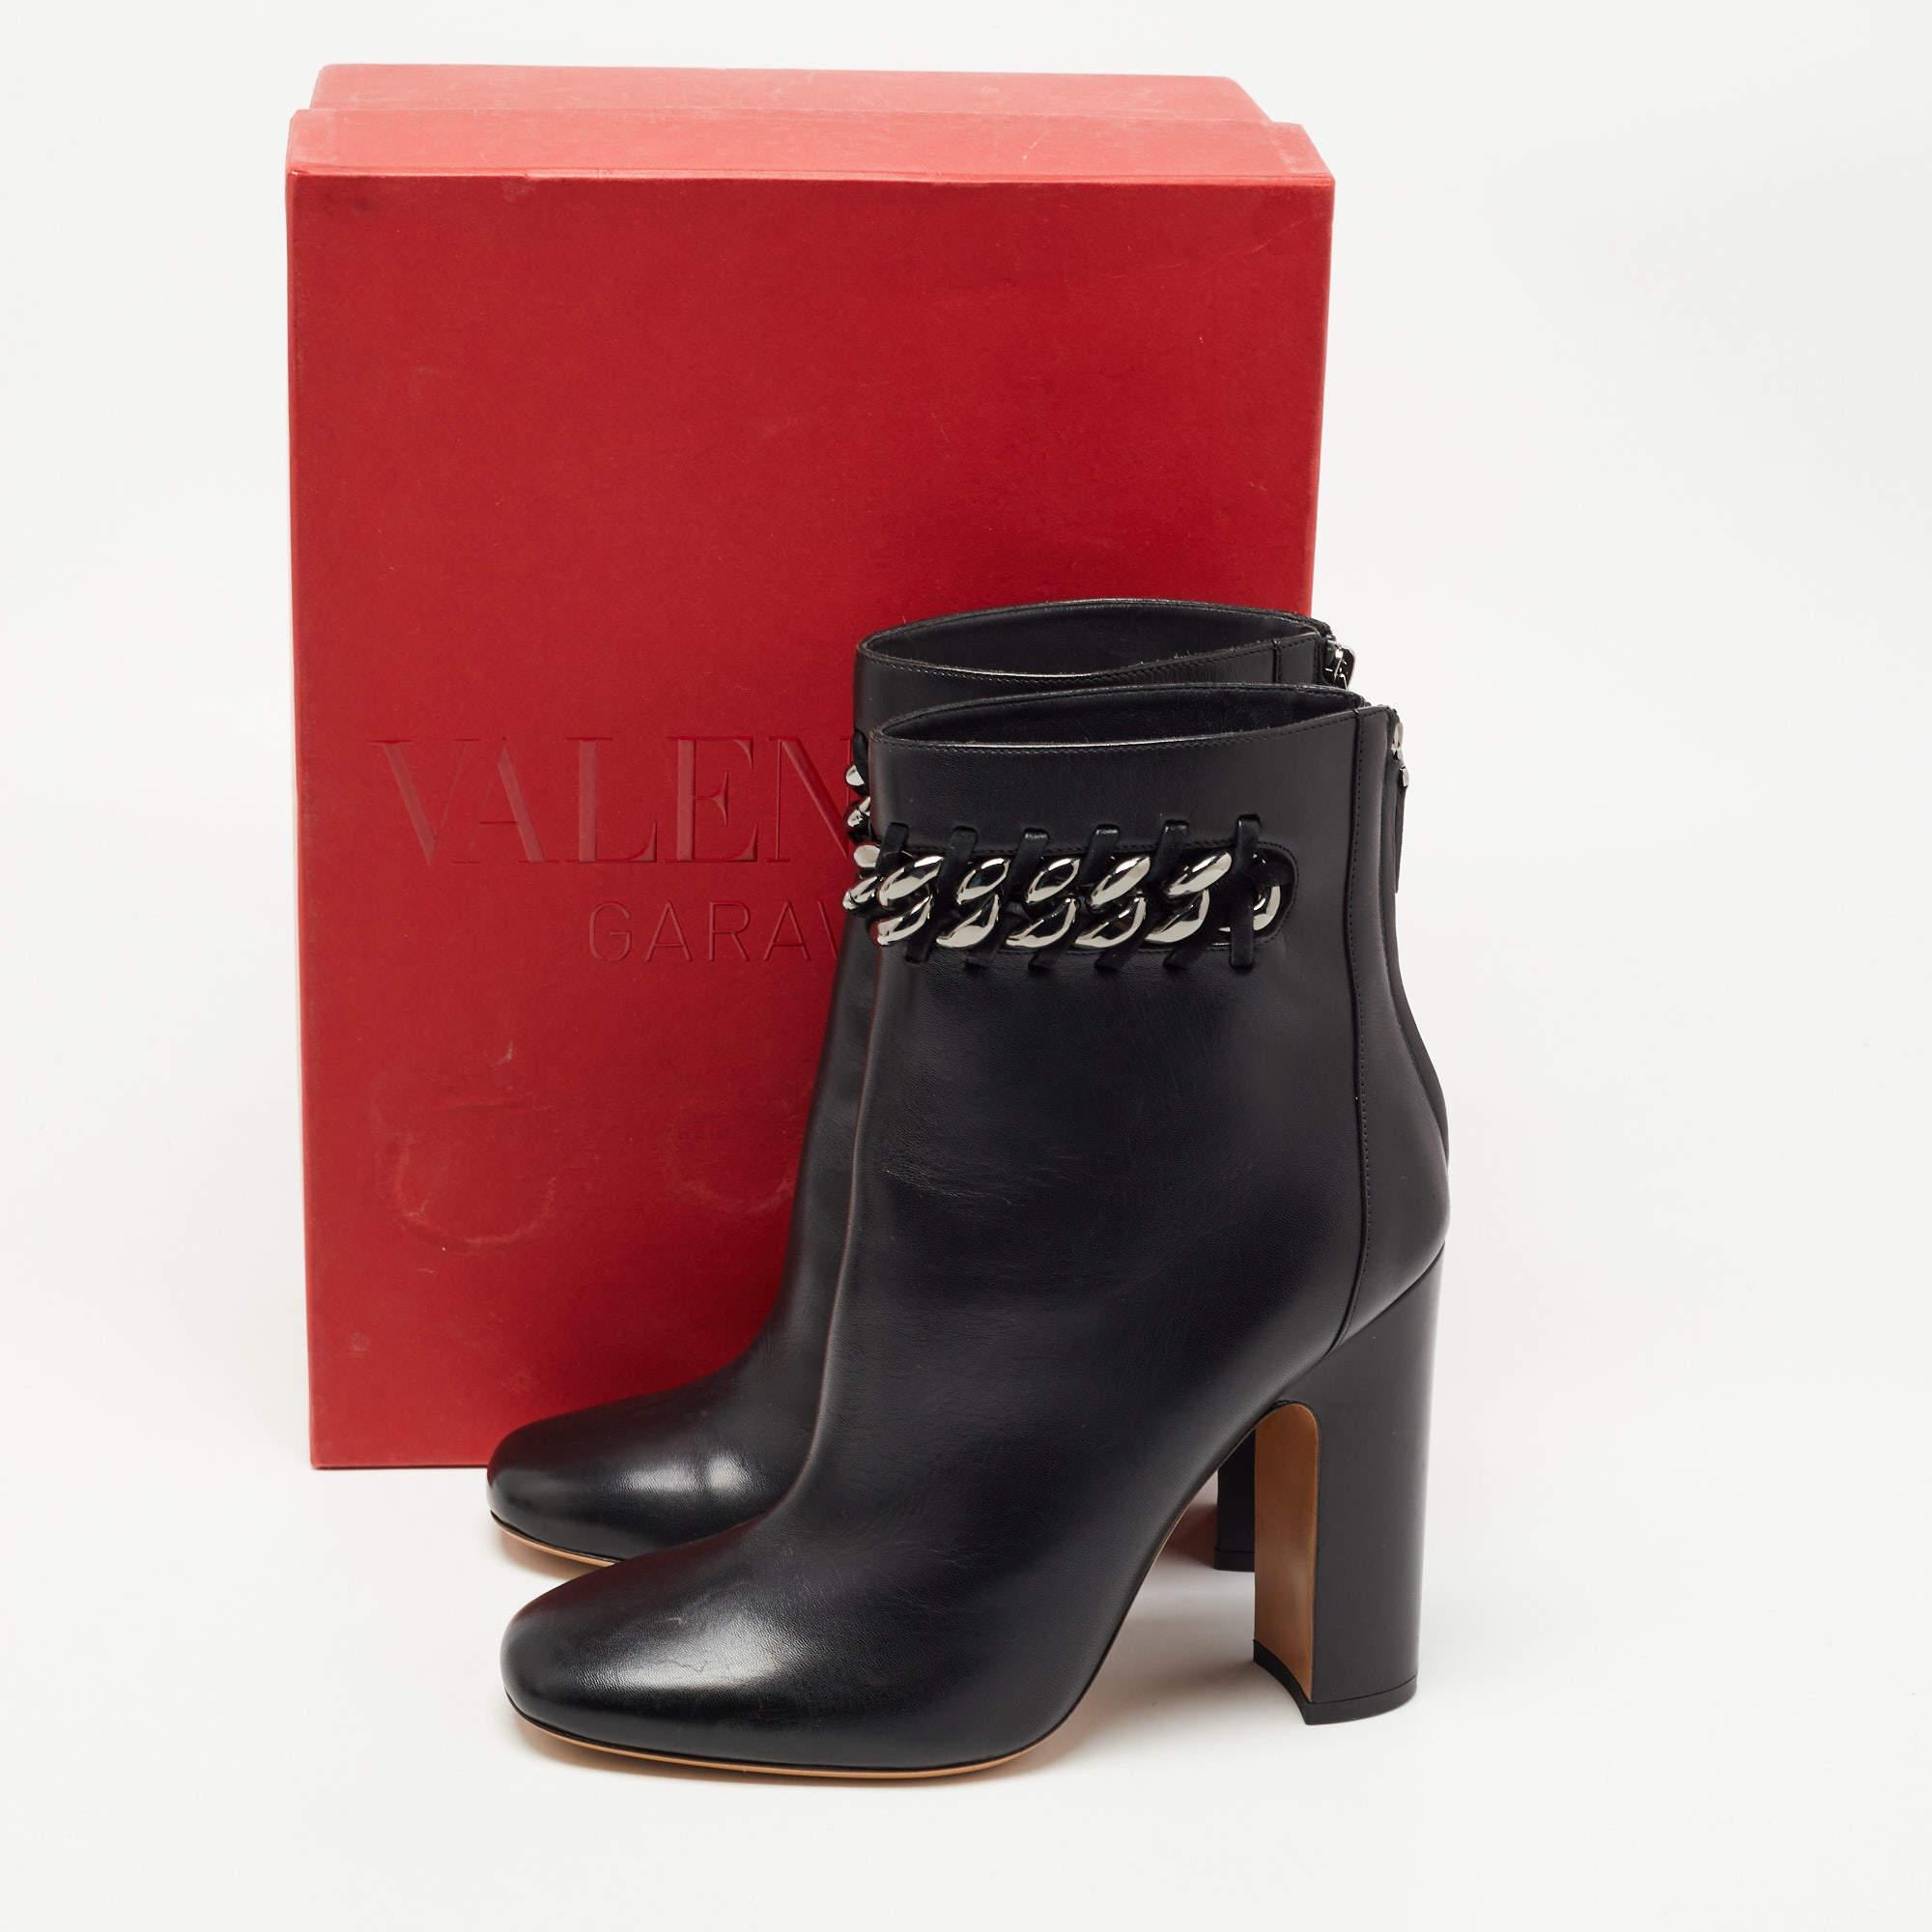 Valentino Black Leather Ankle Boots Size 41 2